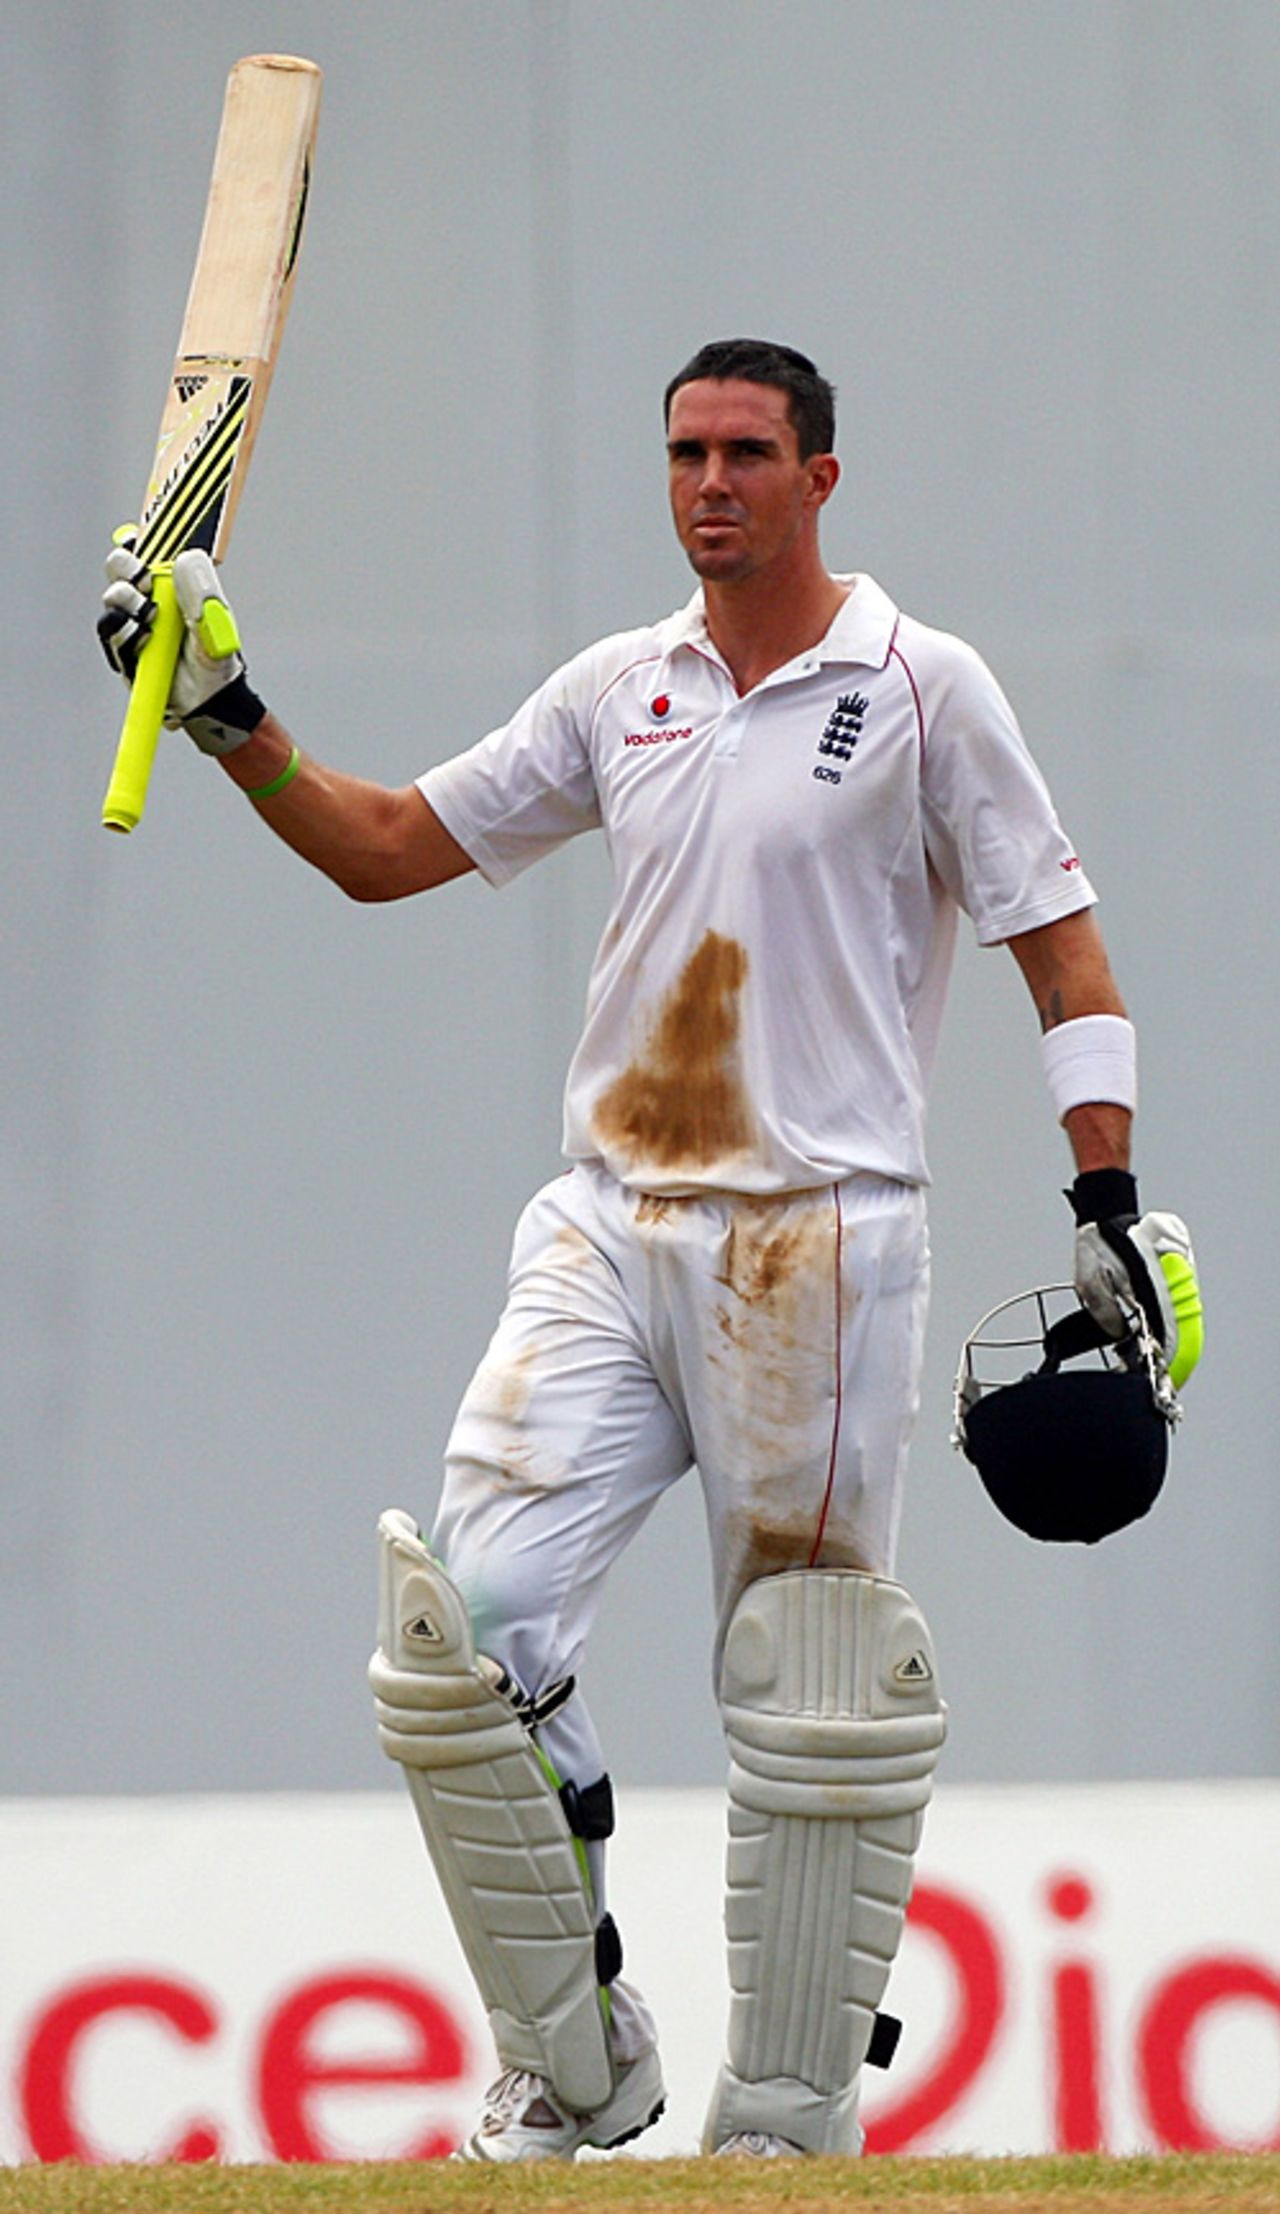 Kevin Pietersen acknowledges applause for his hundred, West Indies v England, 5th Test, Trinidad, March 10, 2009